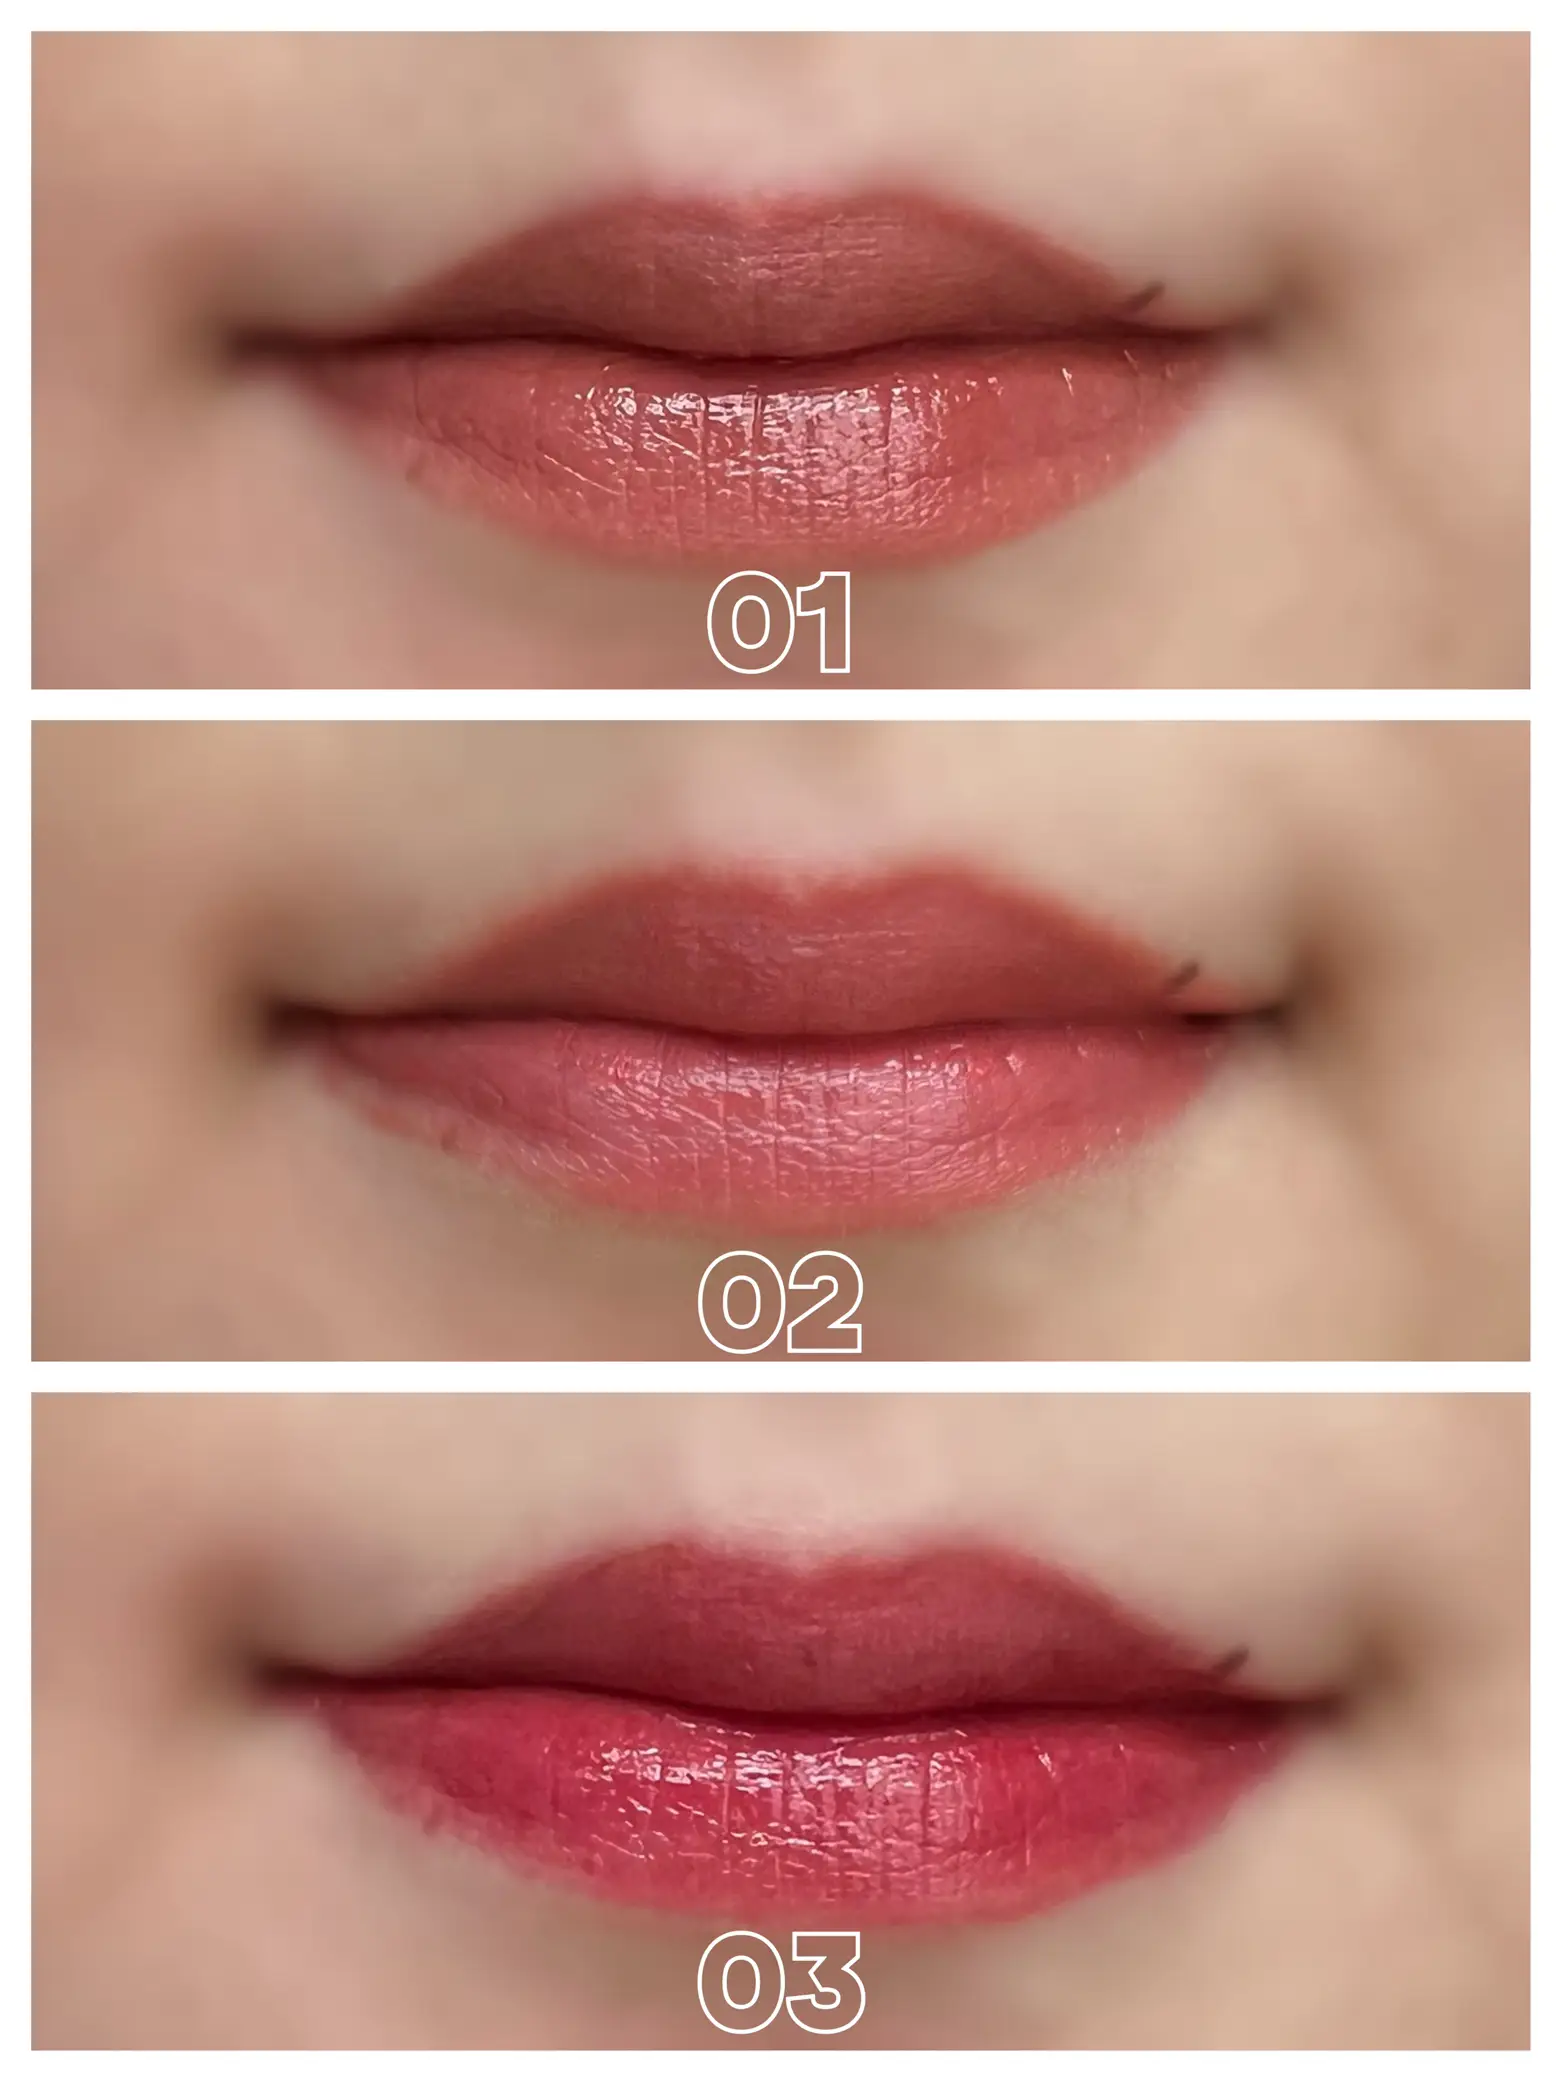 Chanel Rouge Coco Flash Lipstick Shade Expansion Spring 2020